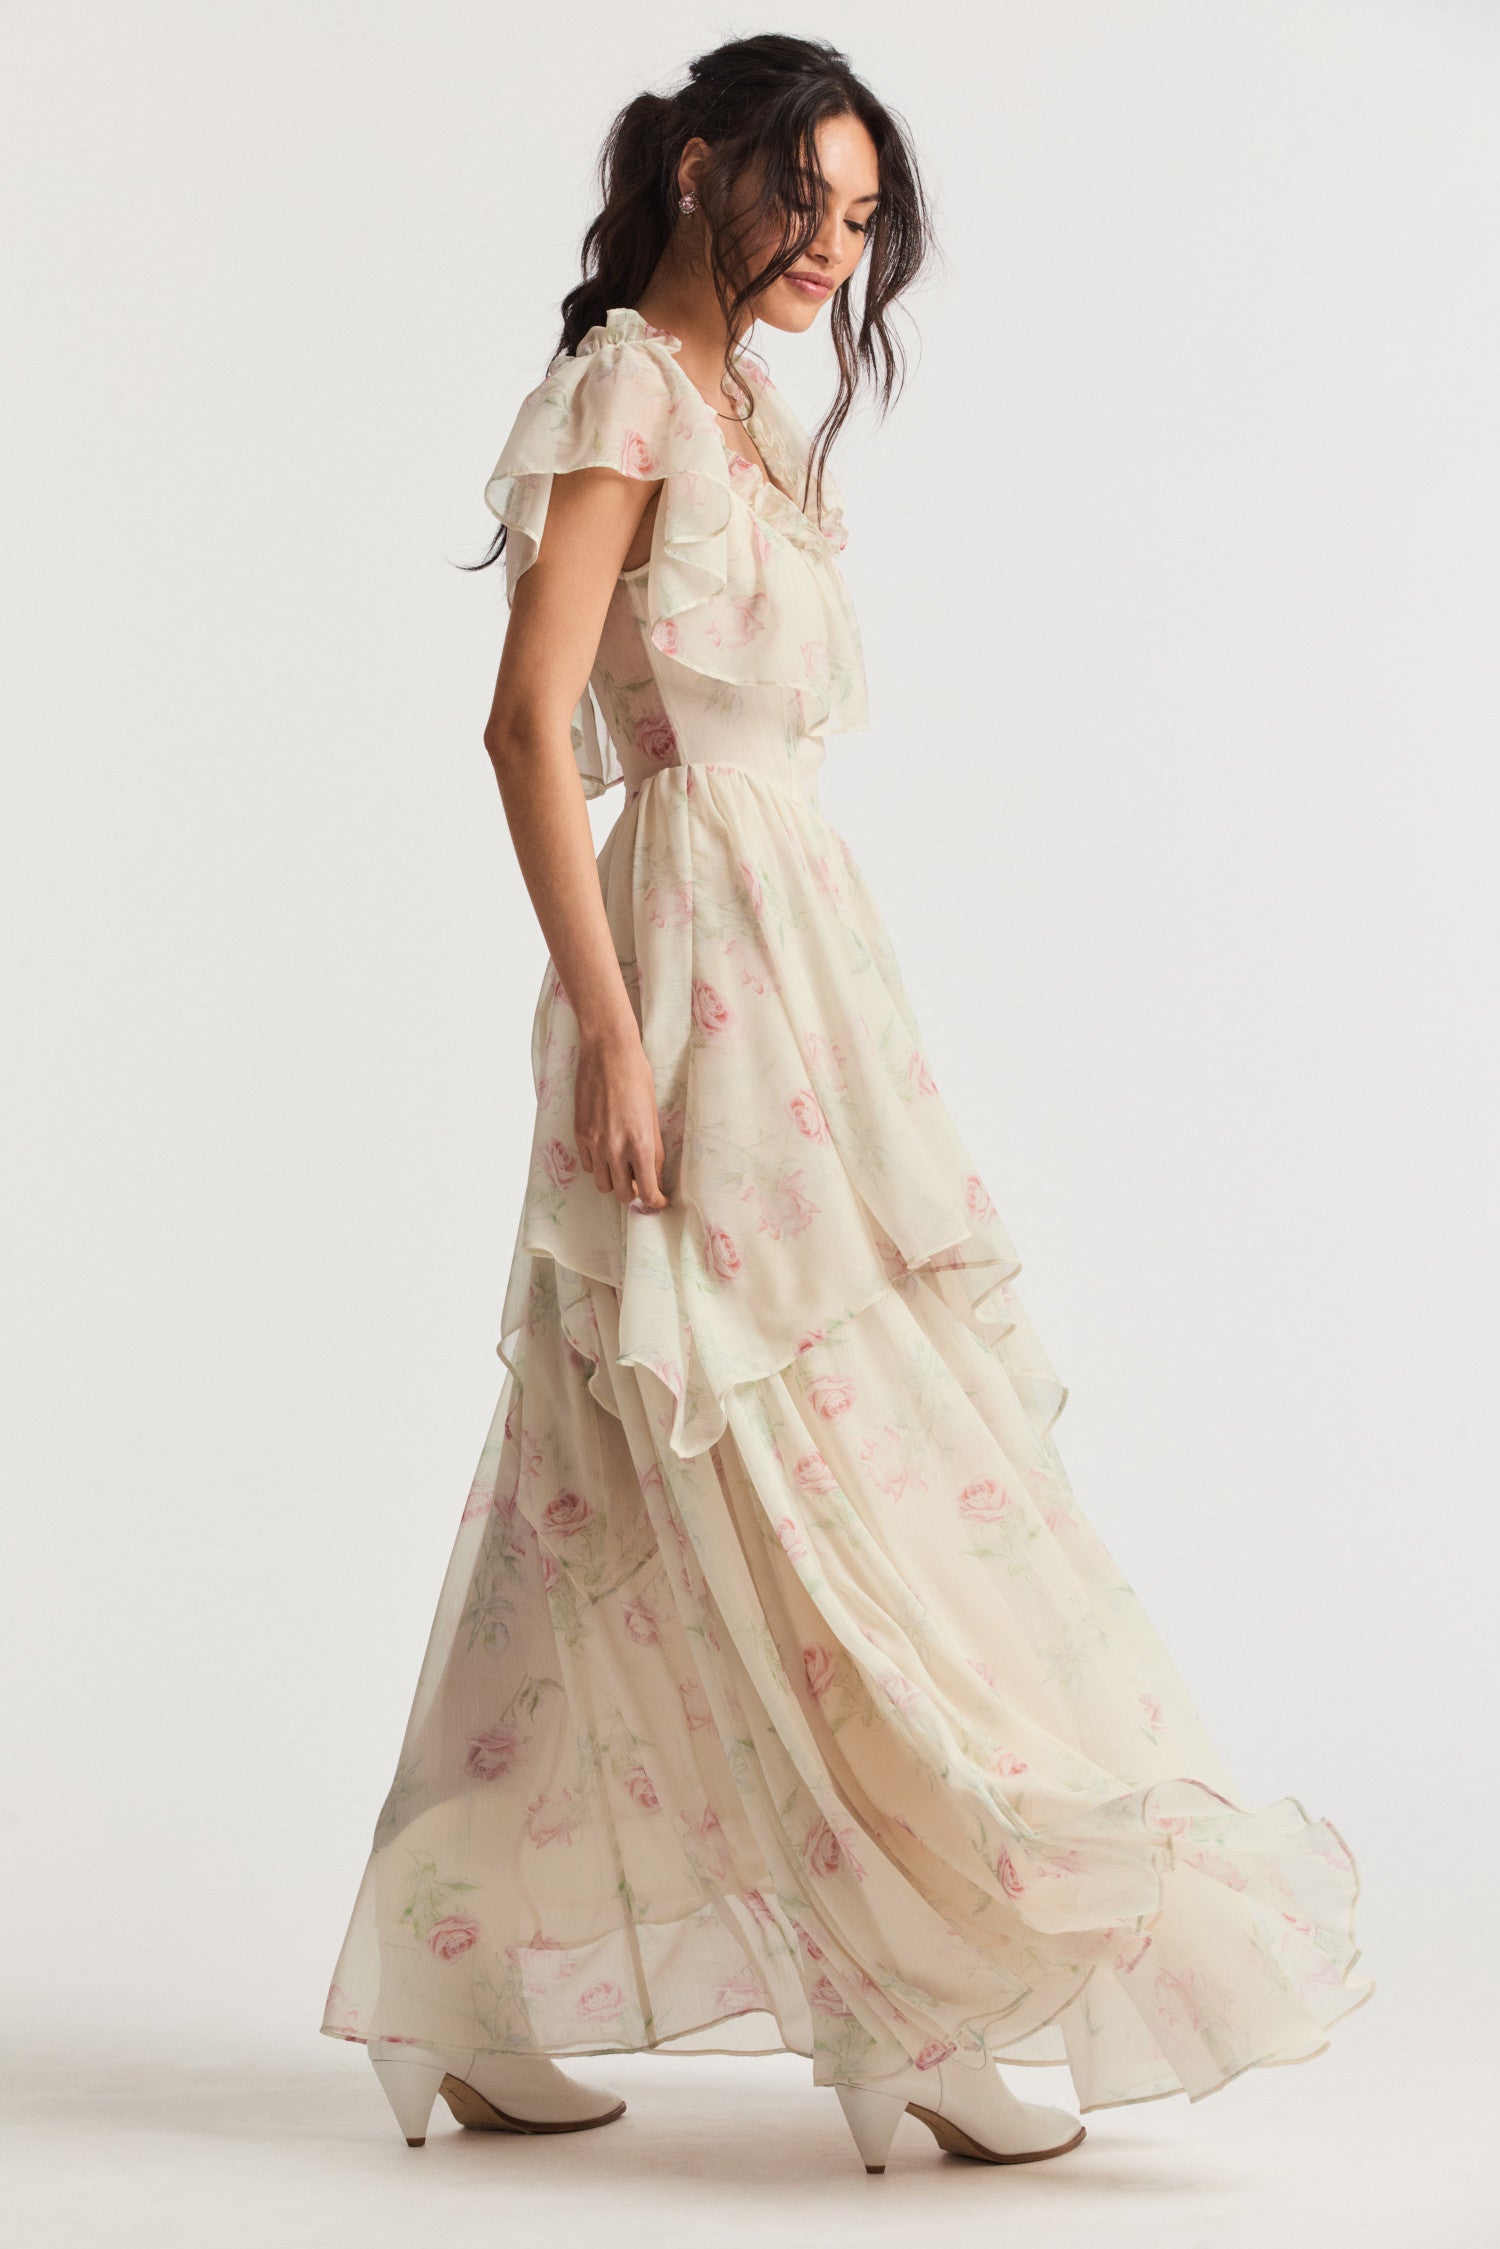 Cream maxi dress with elastic off-the-shoulder silhouette, ruffles around the neck, and a shaped skirt with ethereal tiers.